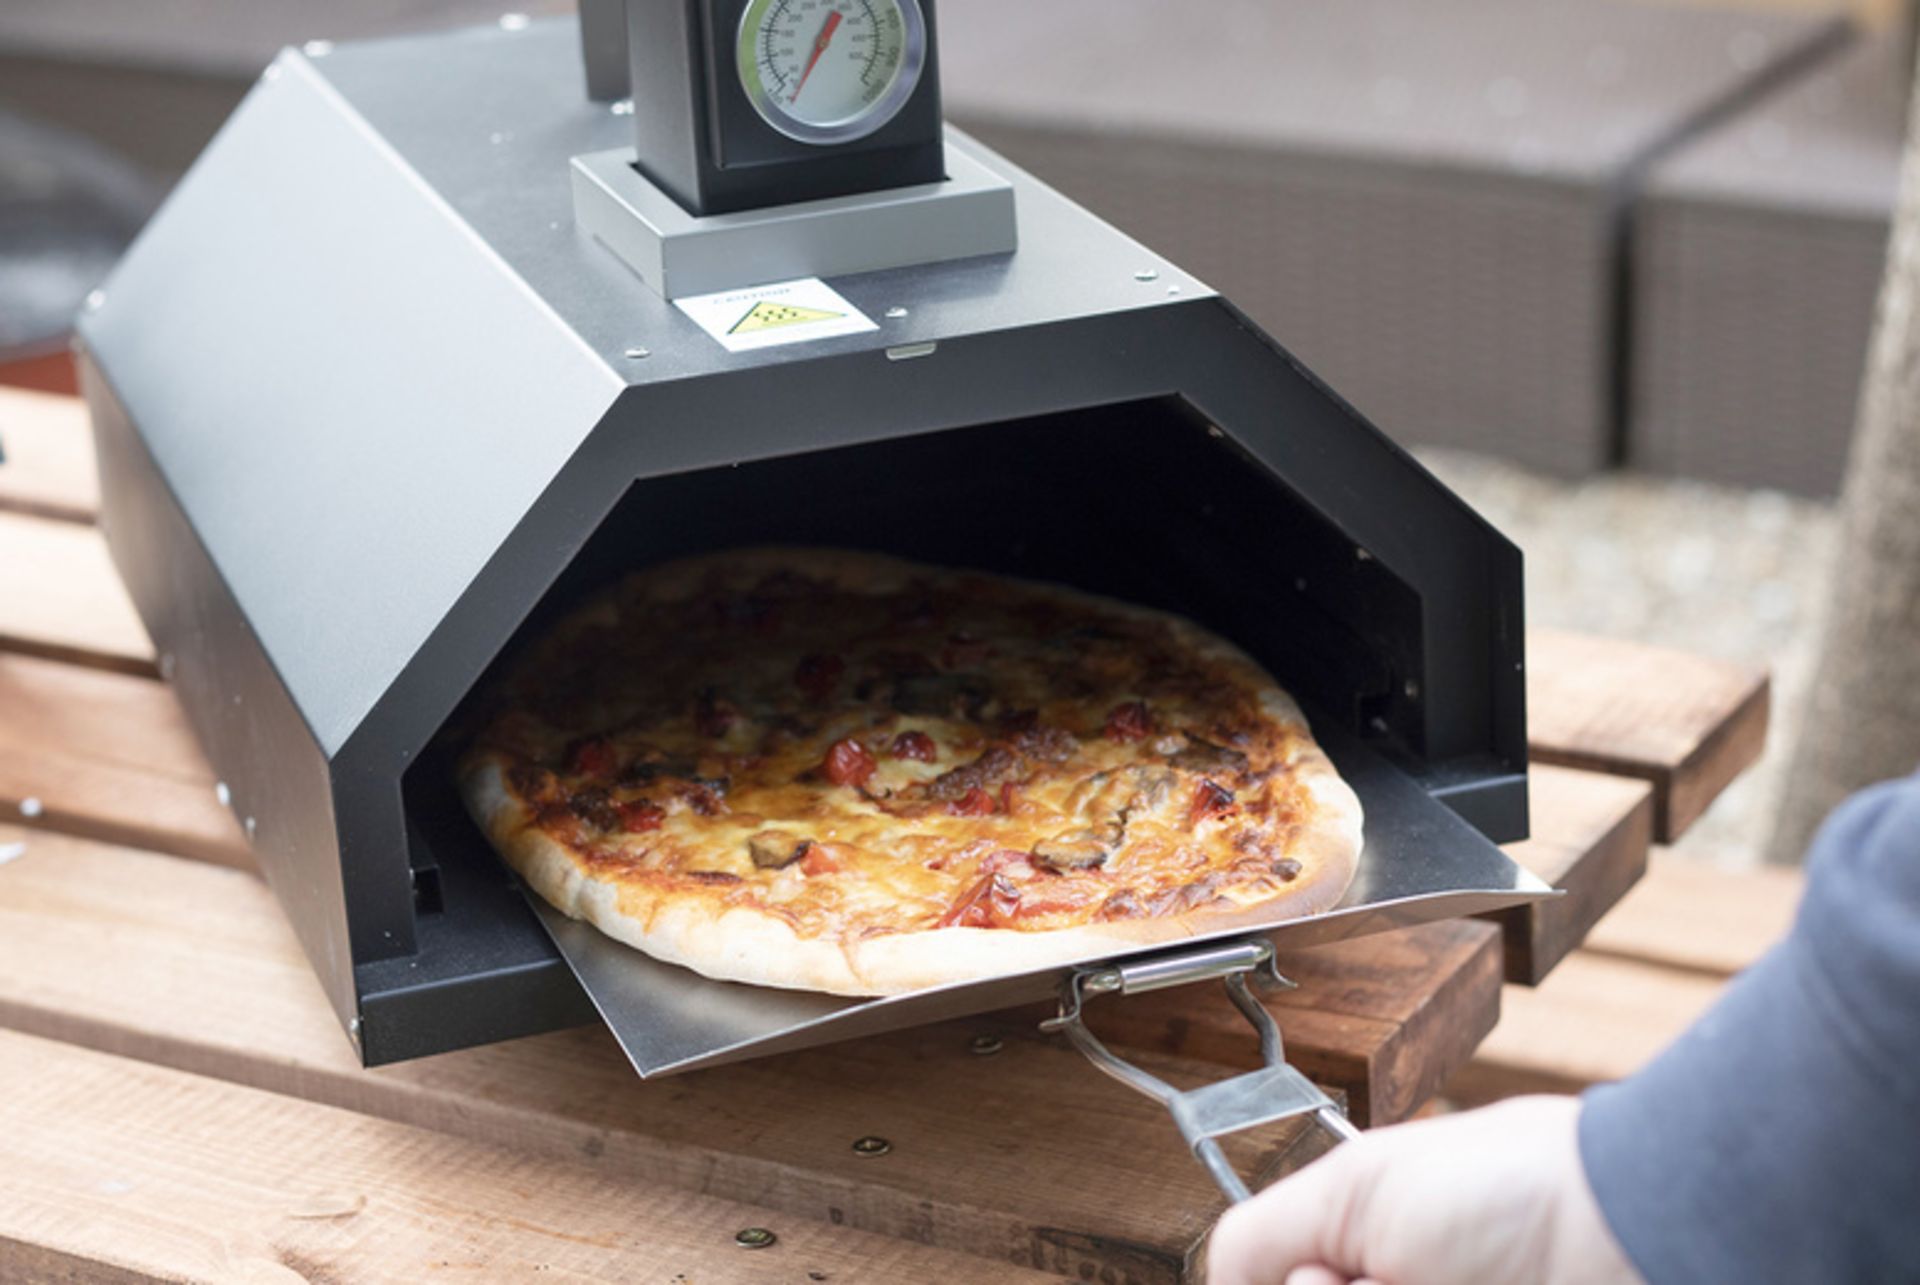 FREE DELIVERY - JOBLOT OF 5 X WOOD FIRED PIZZA OVEN - WITH PADDLE, PIZZA STONE AND COVER